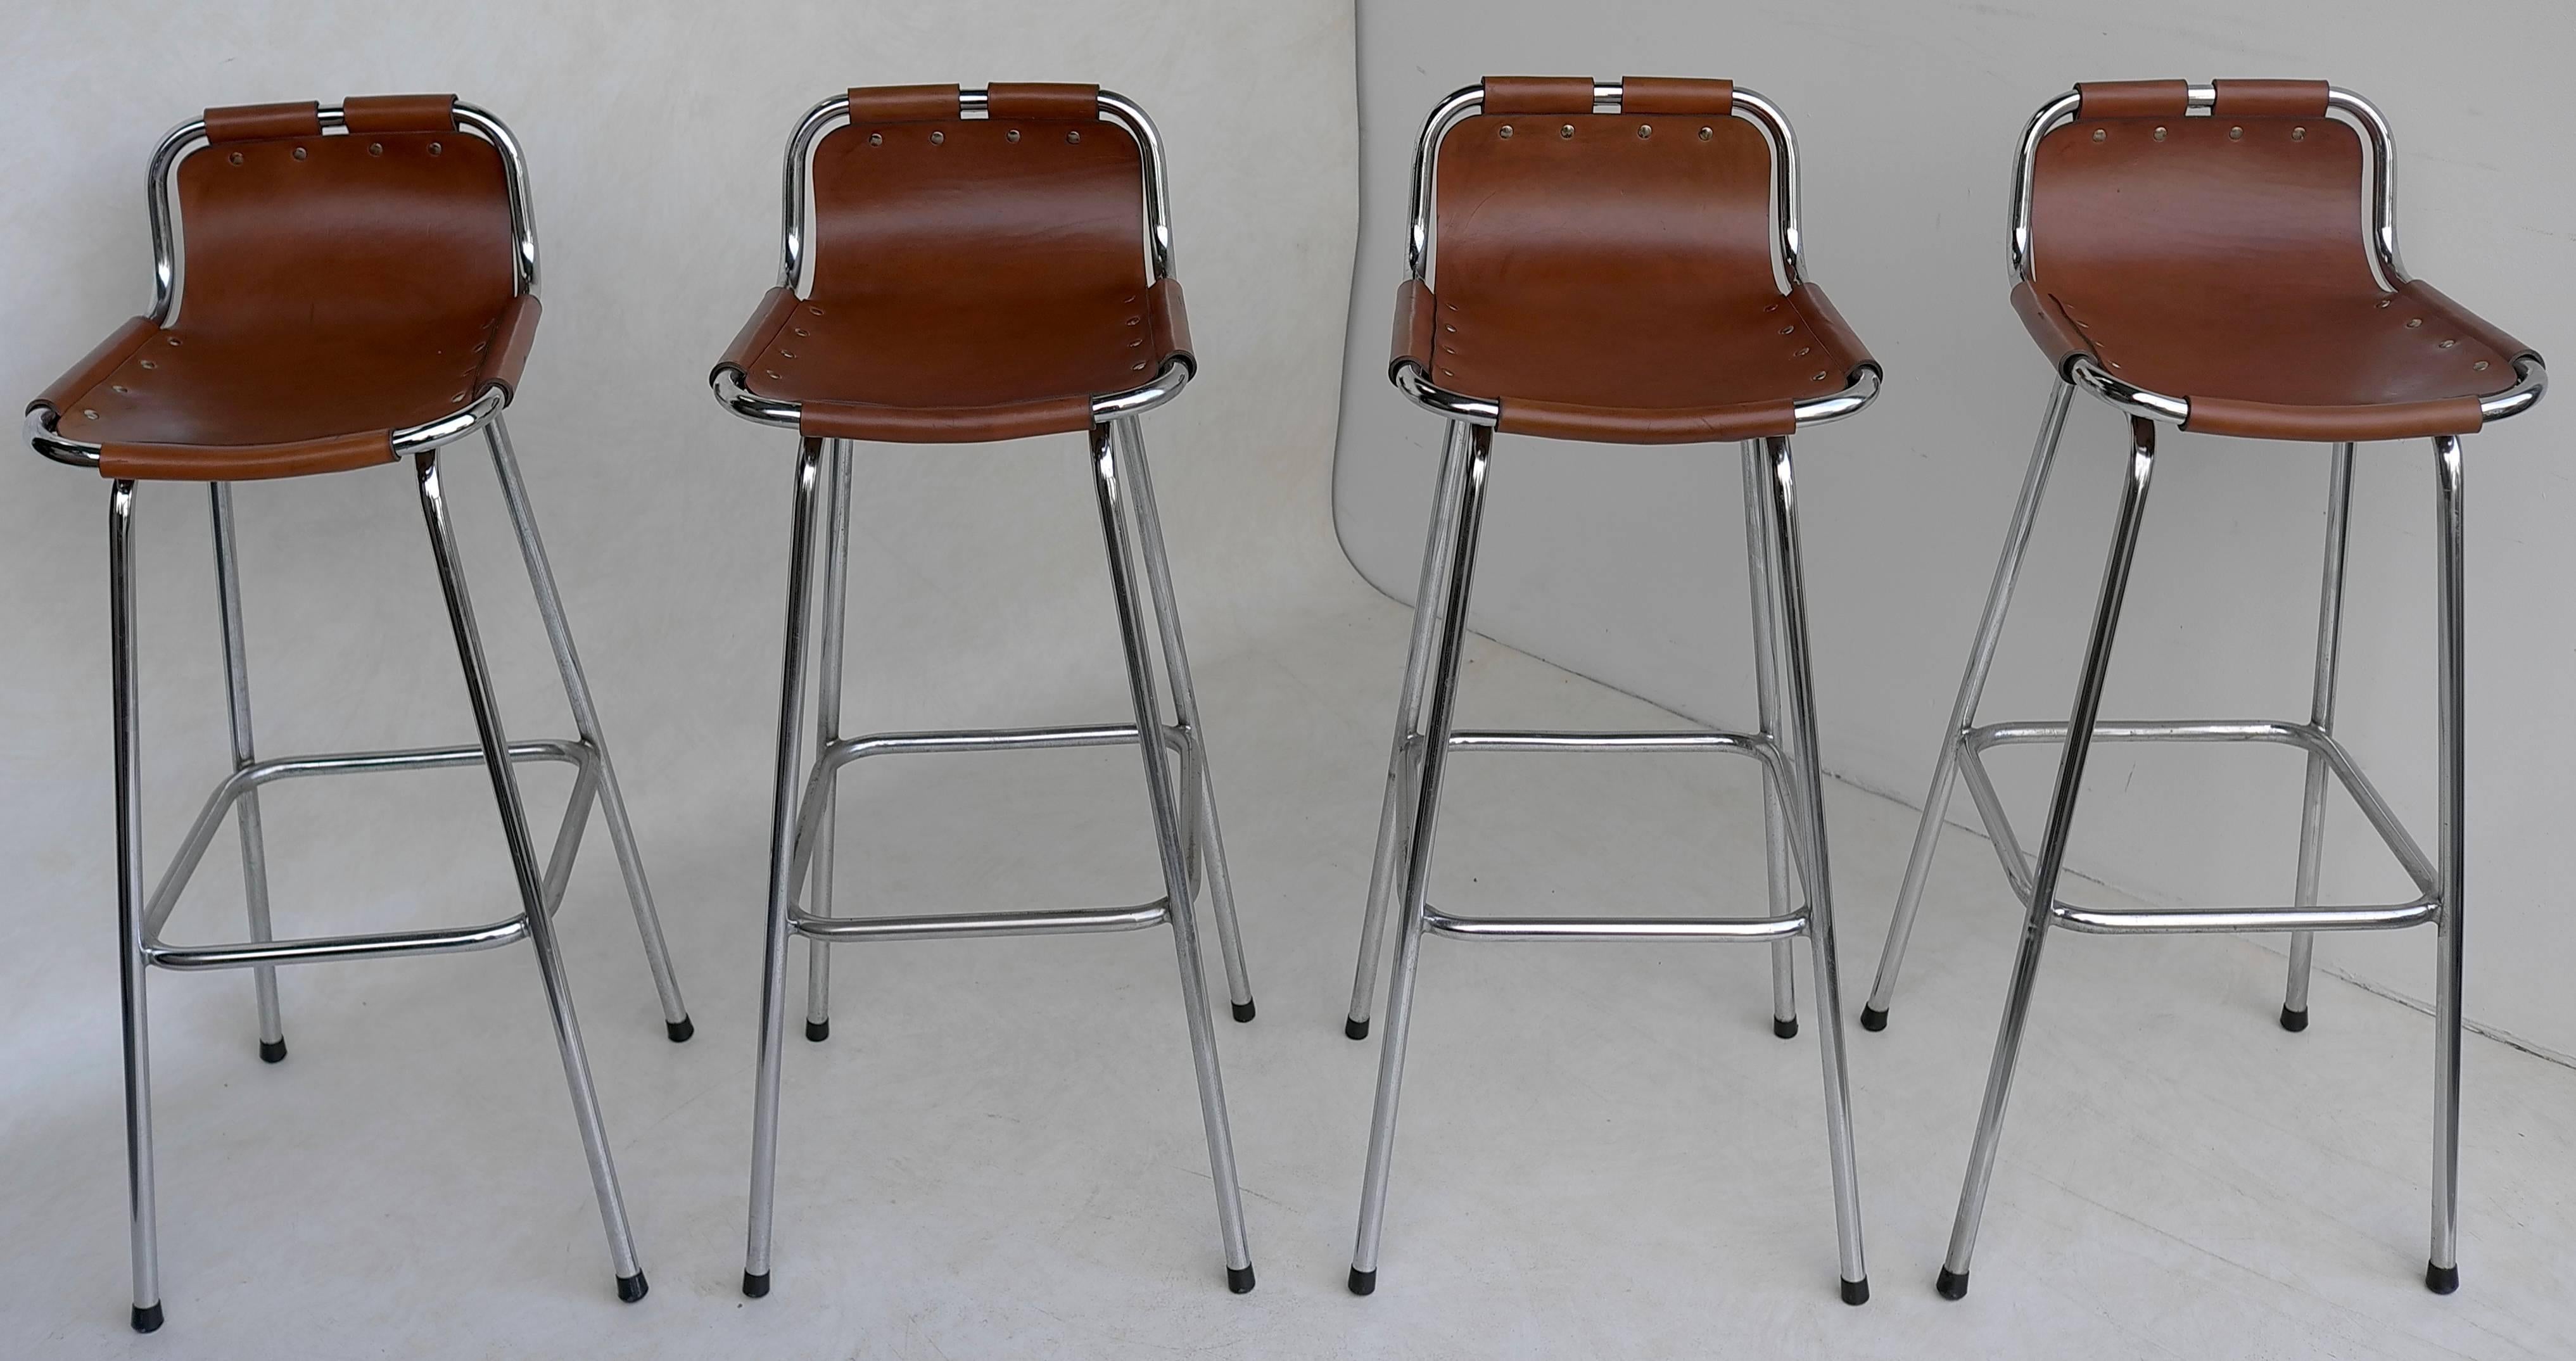 Charlotte Perriand leather barstools for Les Arc Ski Resort, France, 1960s.

Charlotte Perriand was a French architect and designer. Her work aimed to create functional living spaces in the belief that better design helps in creating a better